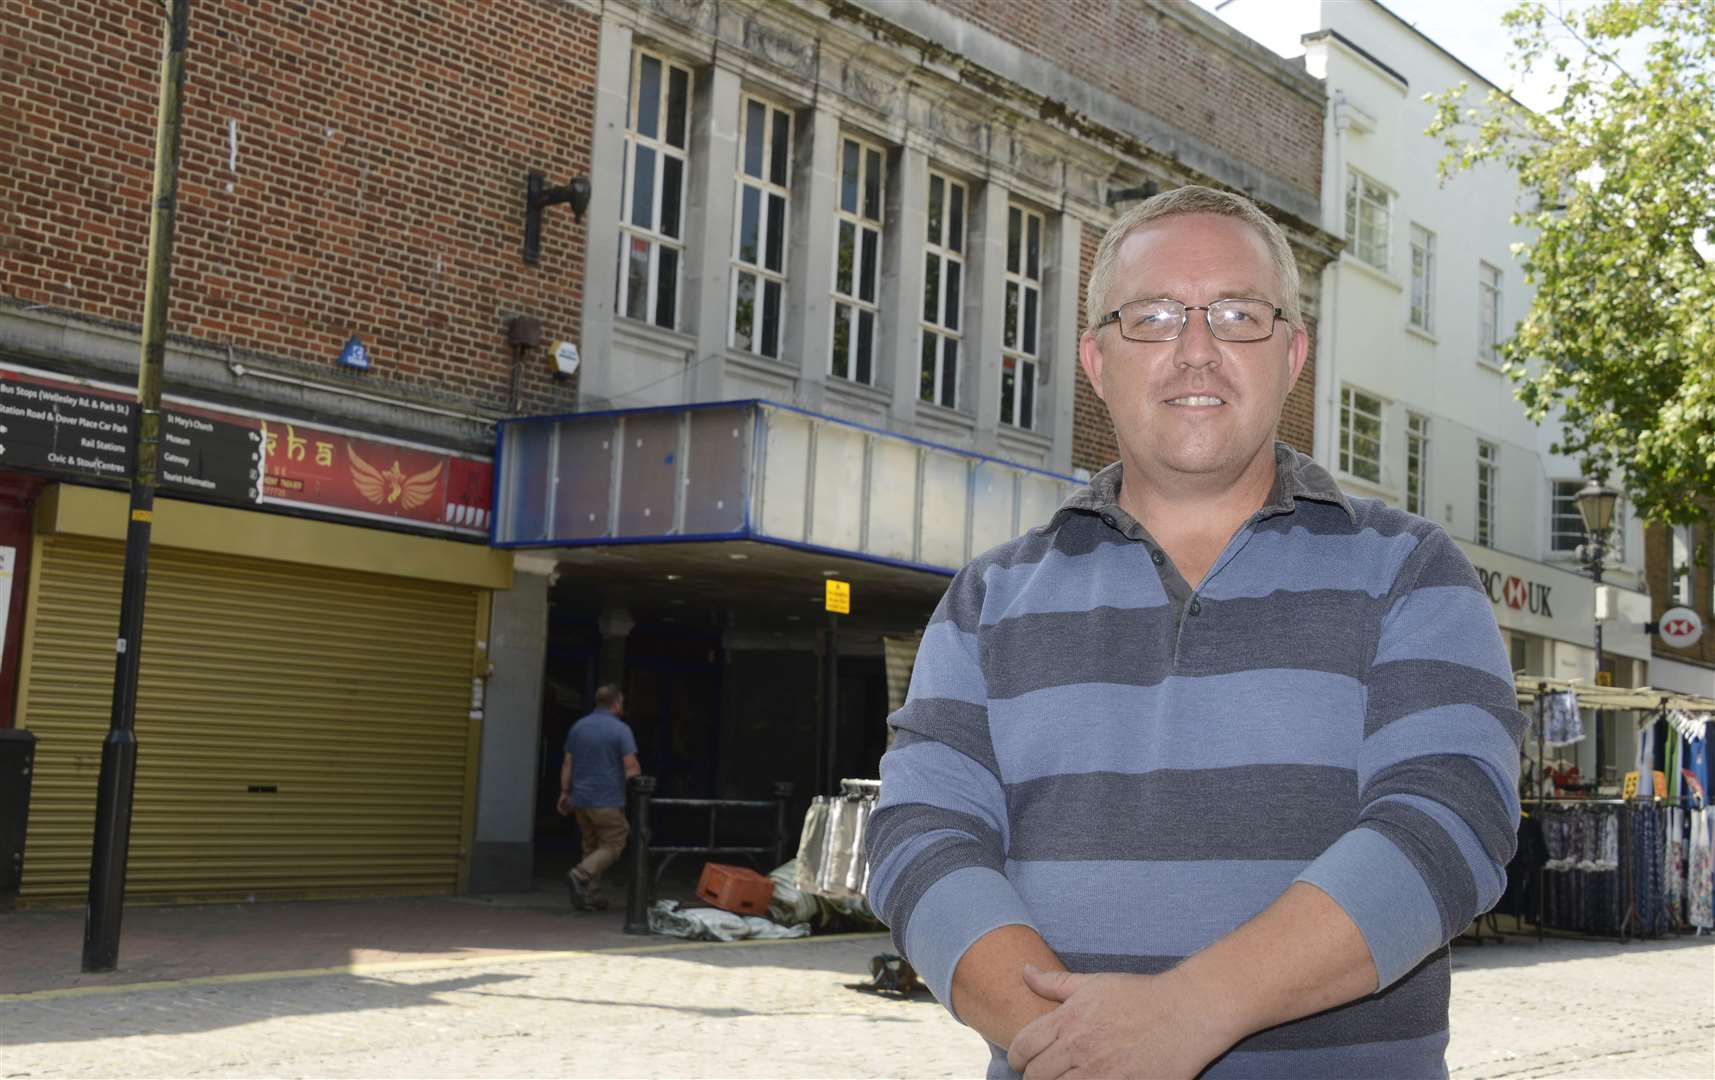 Aldington's Peter Morris-Kelso, pictured in July 2018, started a petition calling for the site to be turned into a theatre